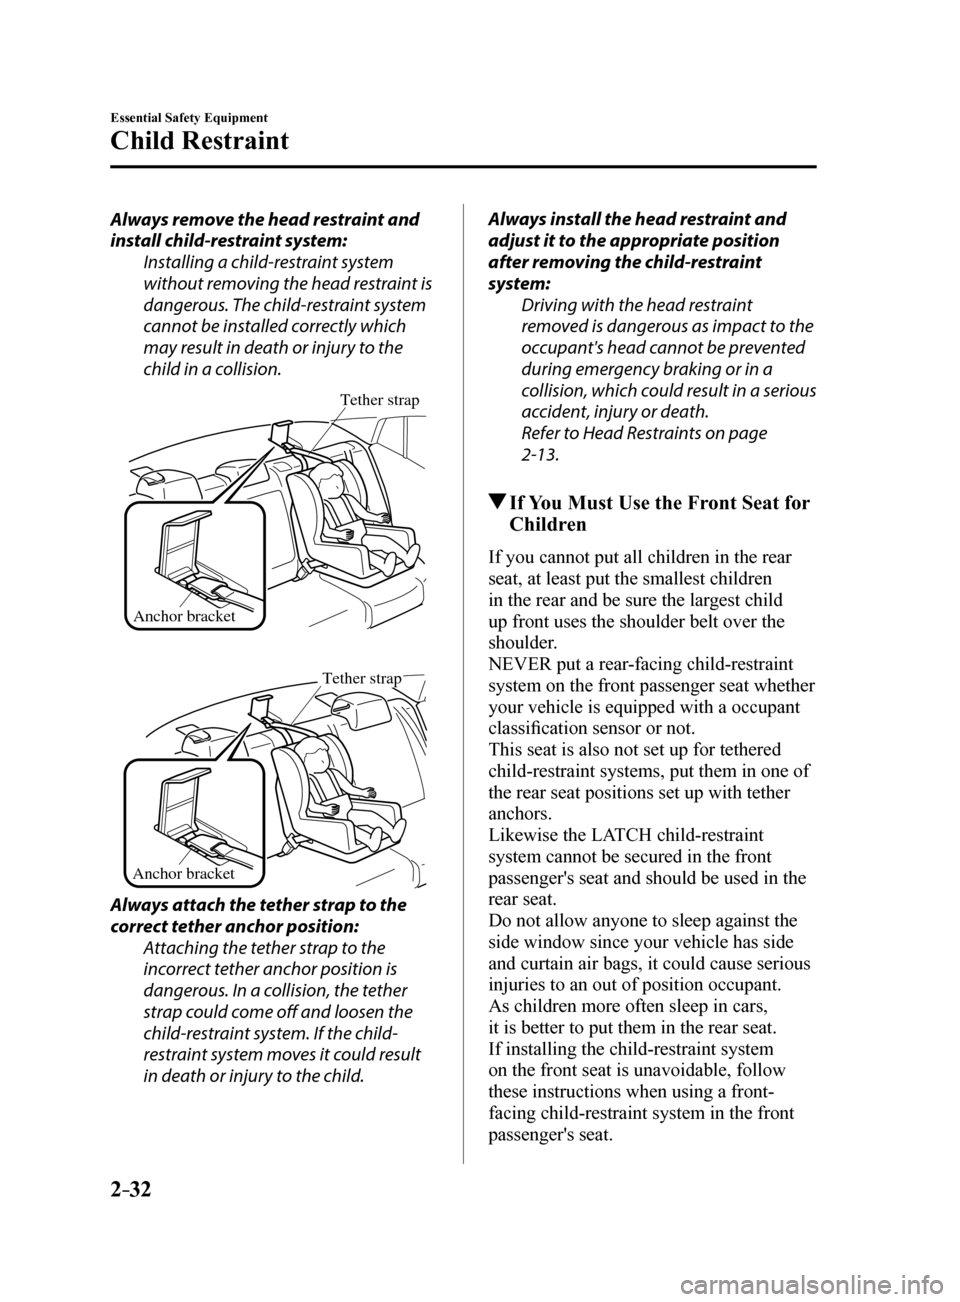 MAZDA MODEL 6 2017   (in English) Service Manual 2–32
Essential Safety Equipment
Child Restraint
Always remove the head restraint and 
install child-restraint system:Installing a child-restraint system 
without removing the head restraint is 
dang